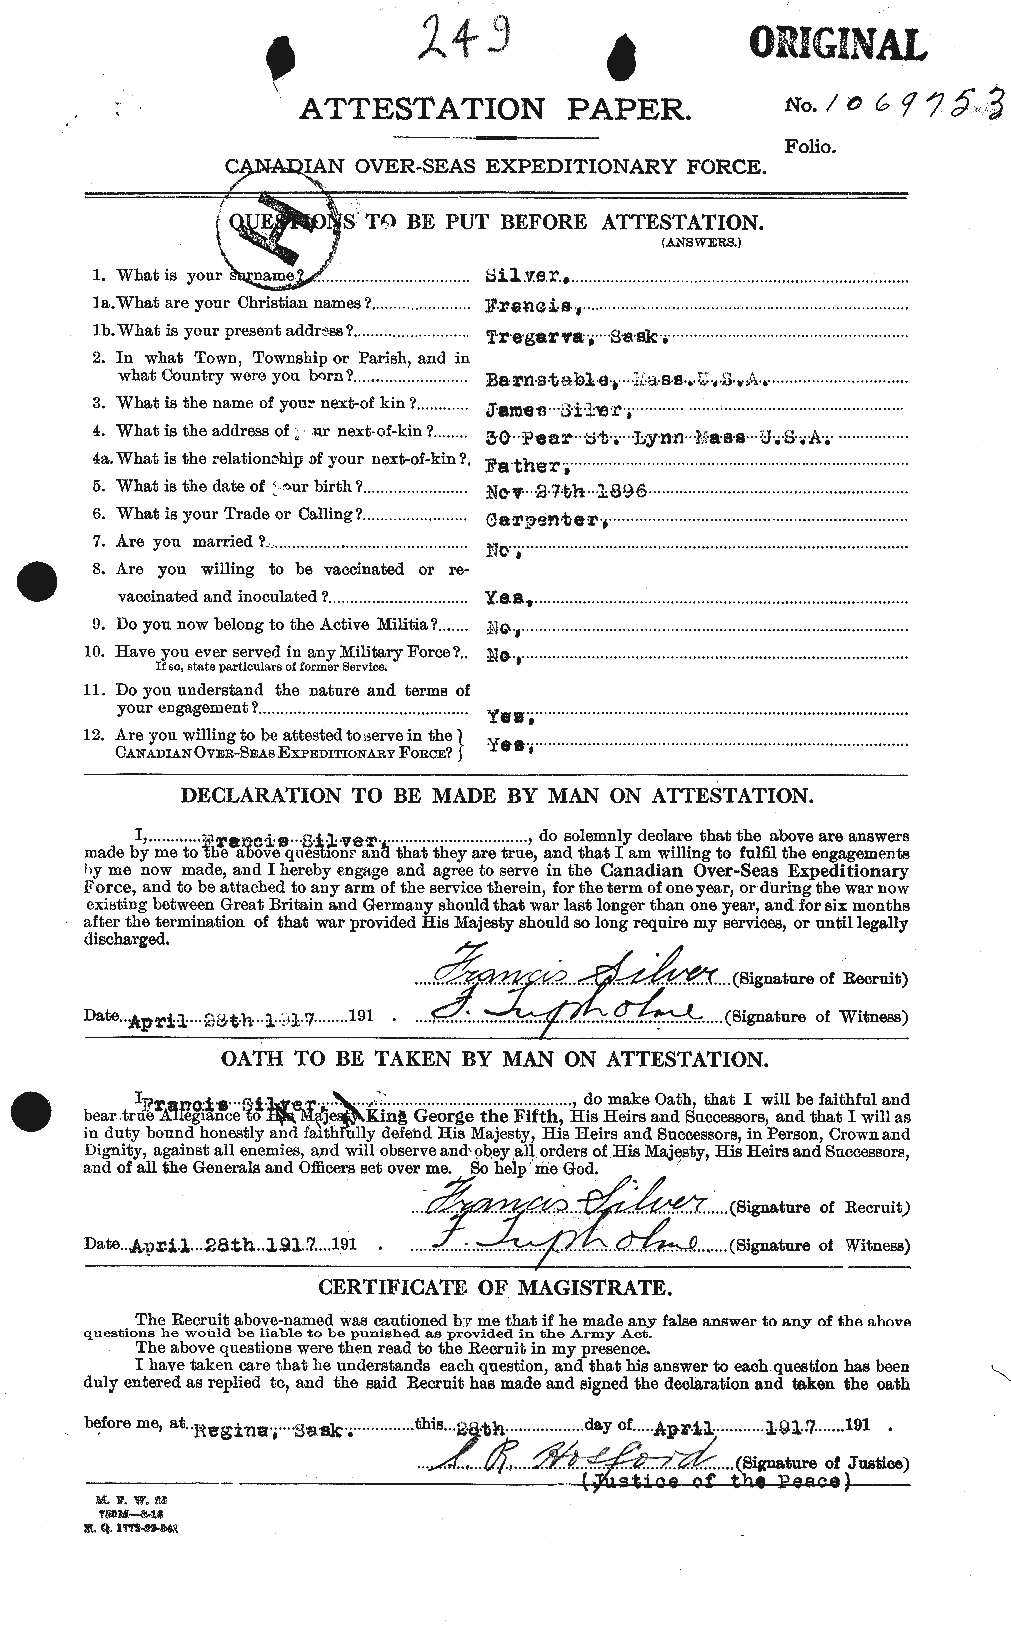 Personnel Records of the First World War - CEF 096302a